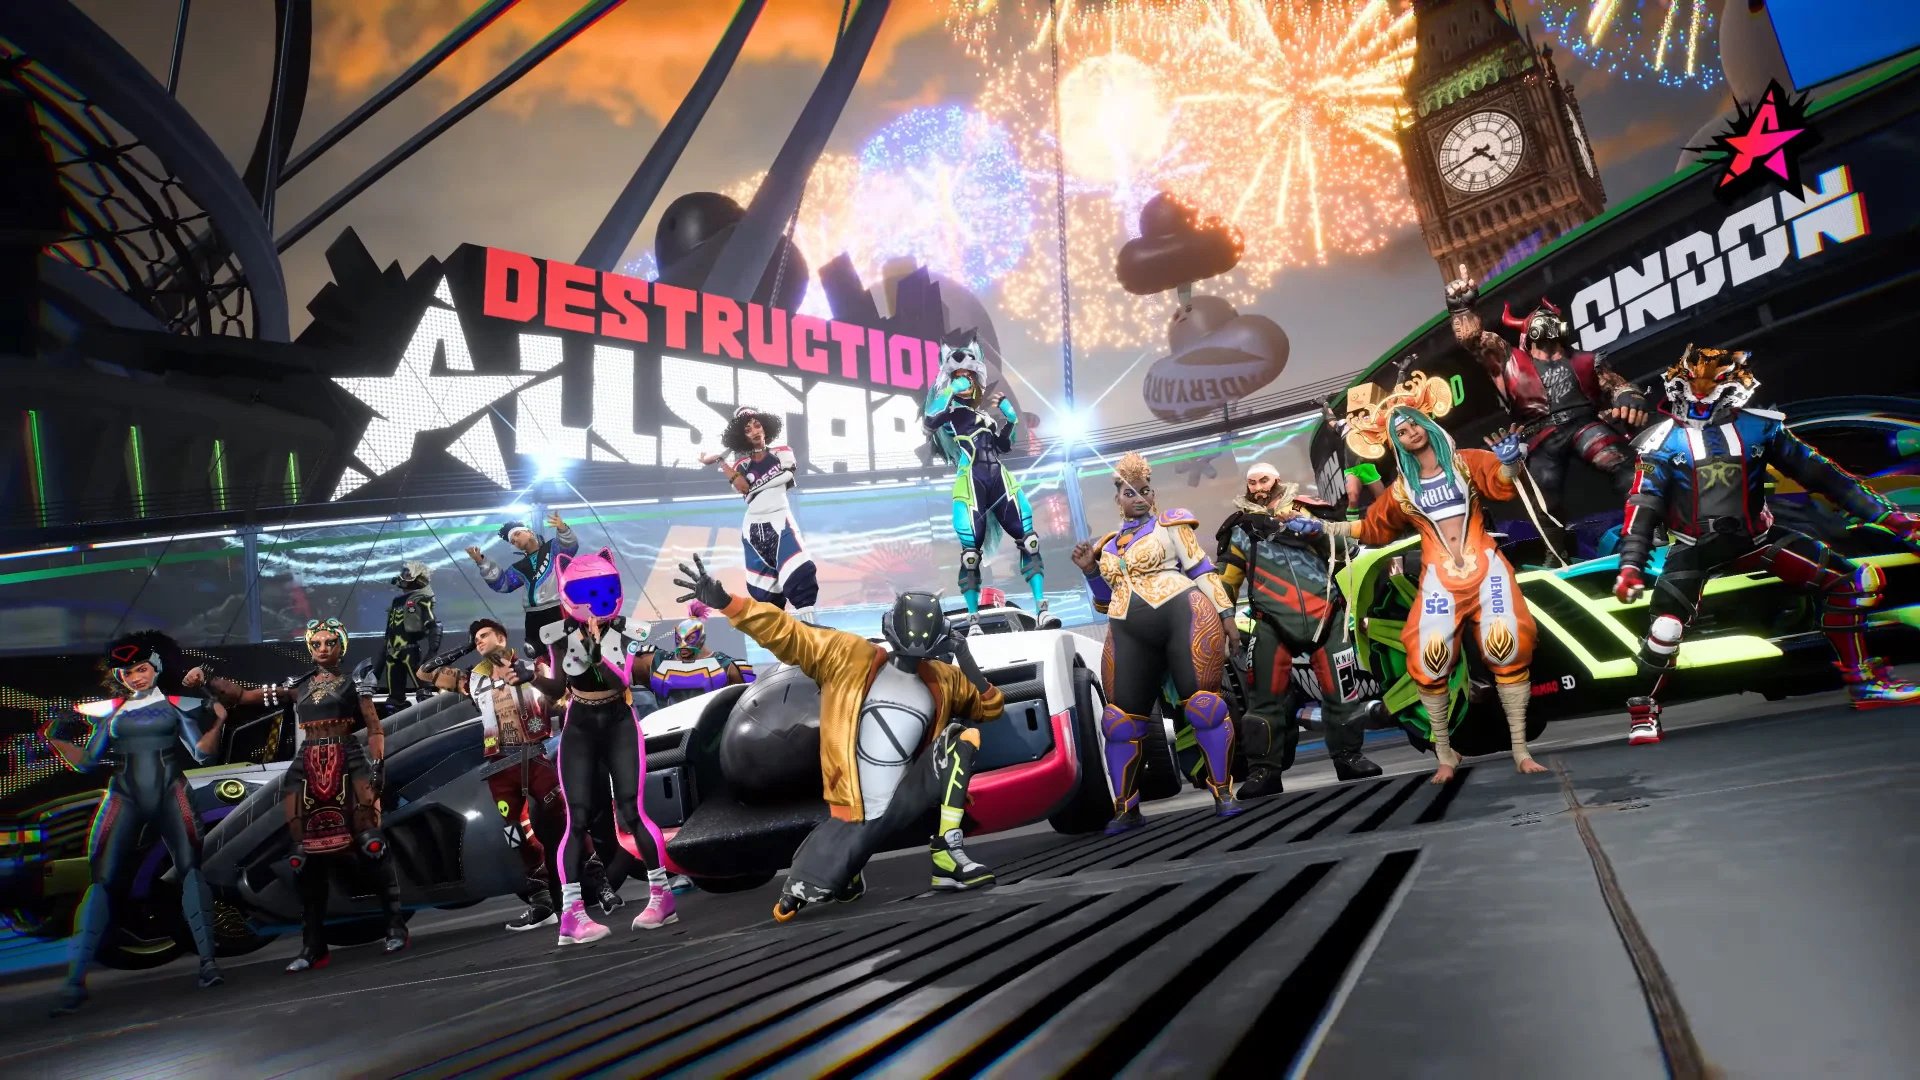 Today Destruction PS5 Update, Games AllStars On mxdwn - Gets New Out